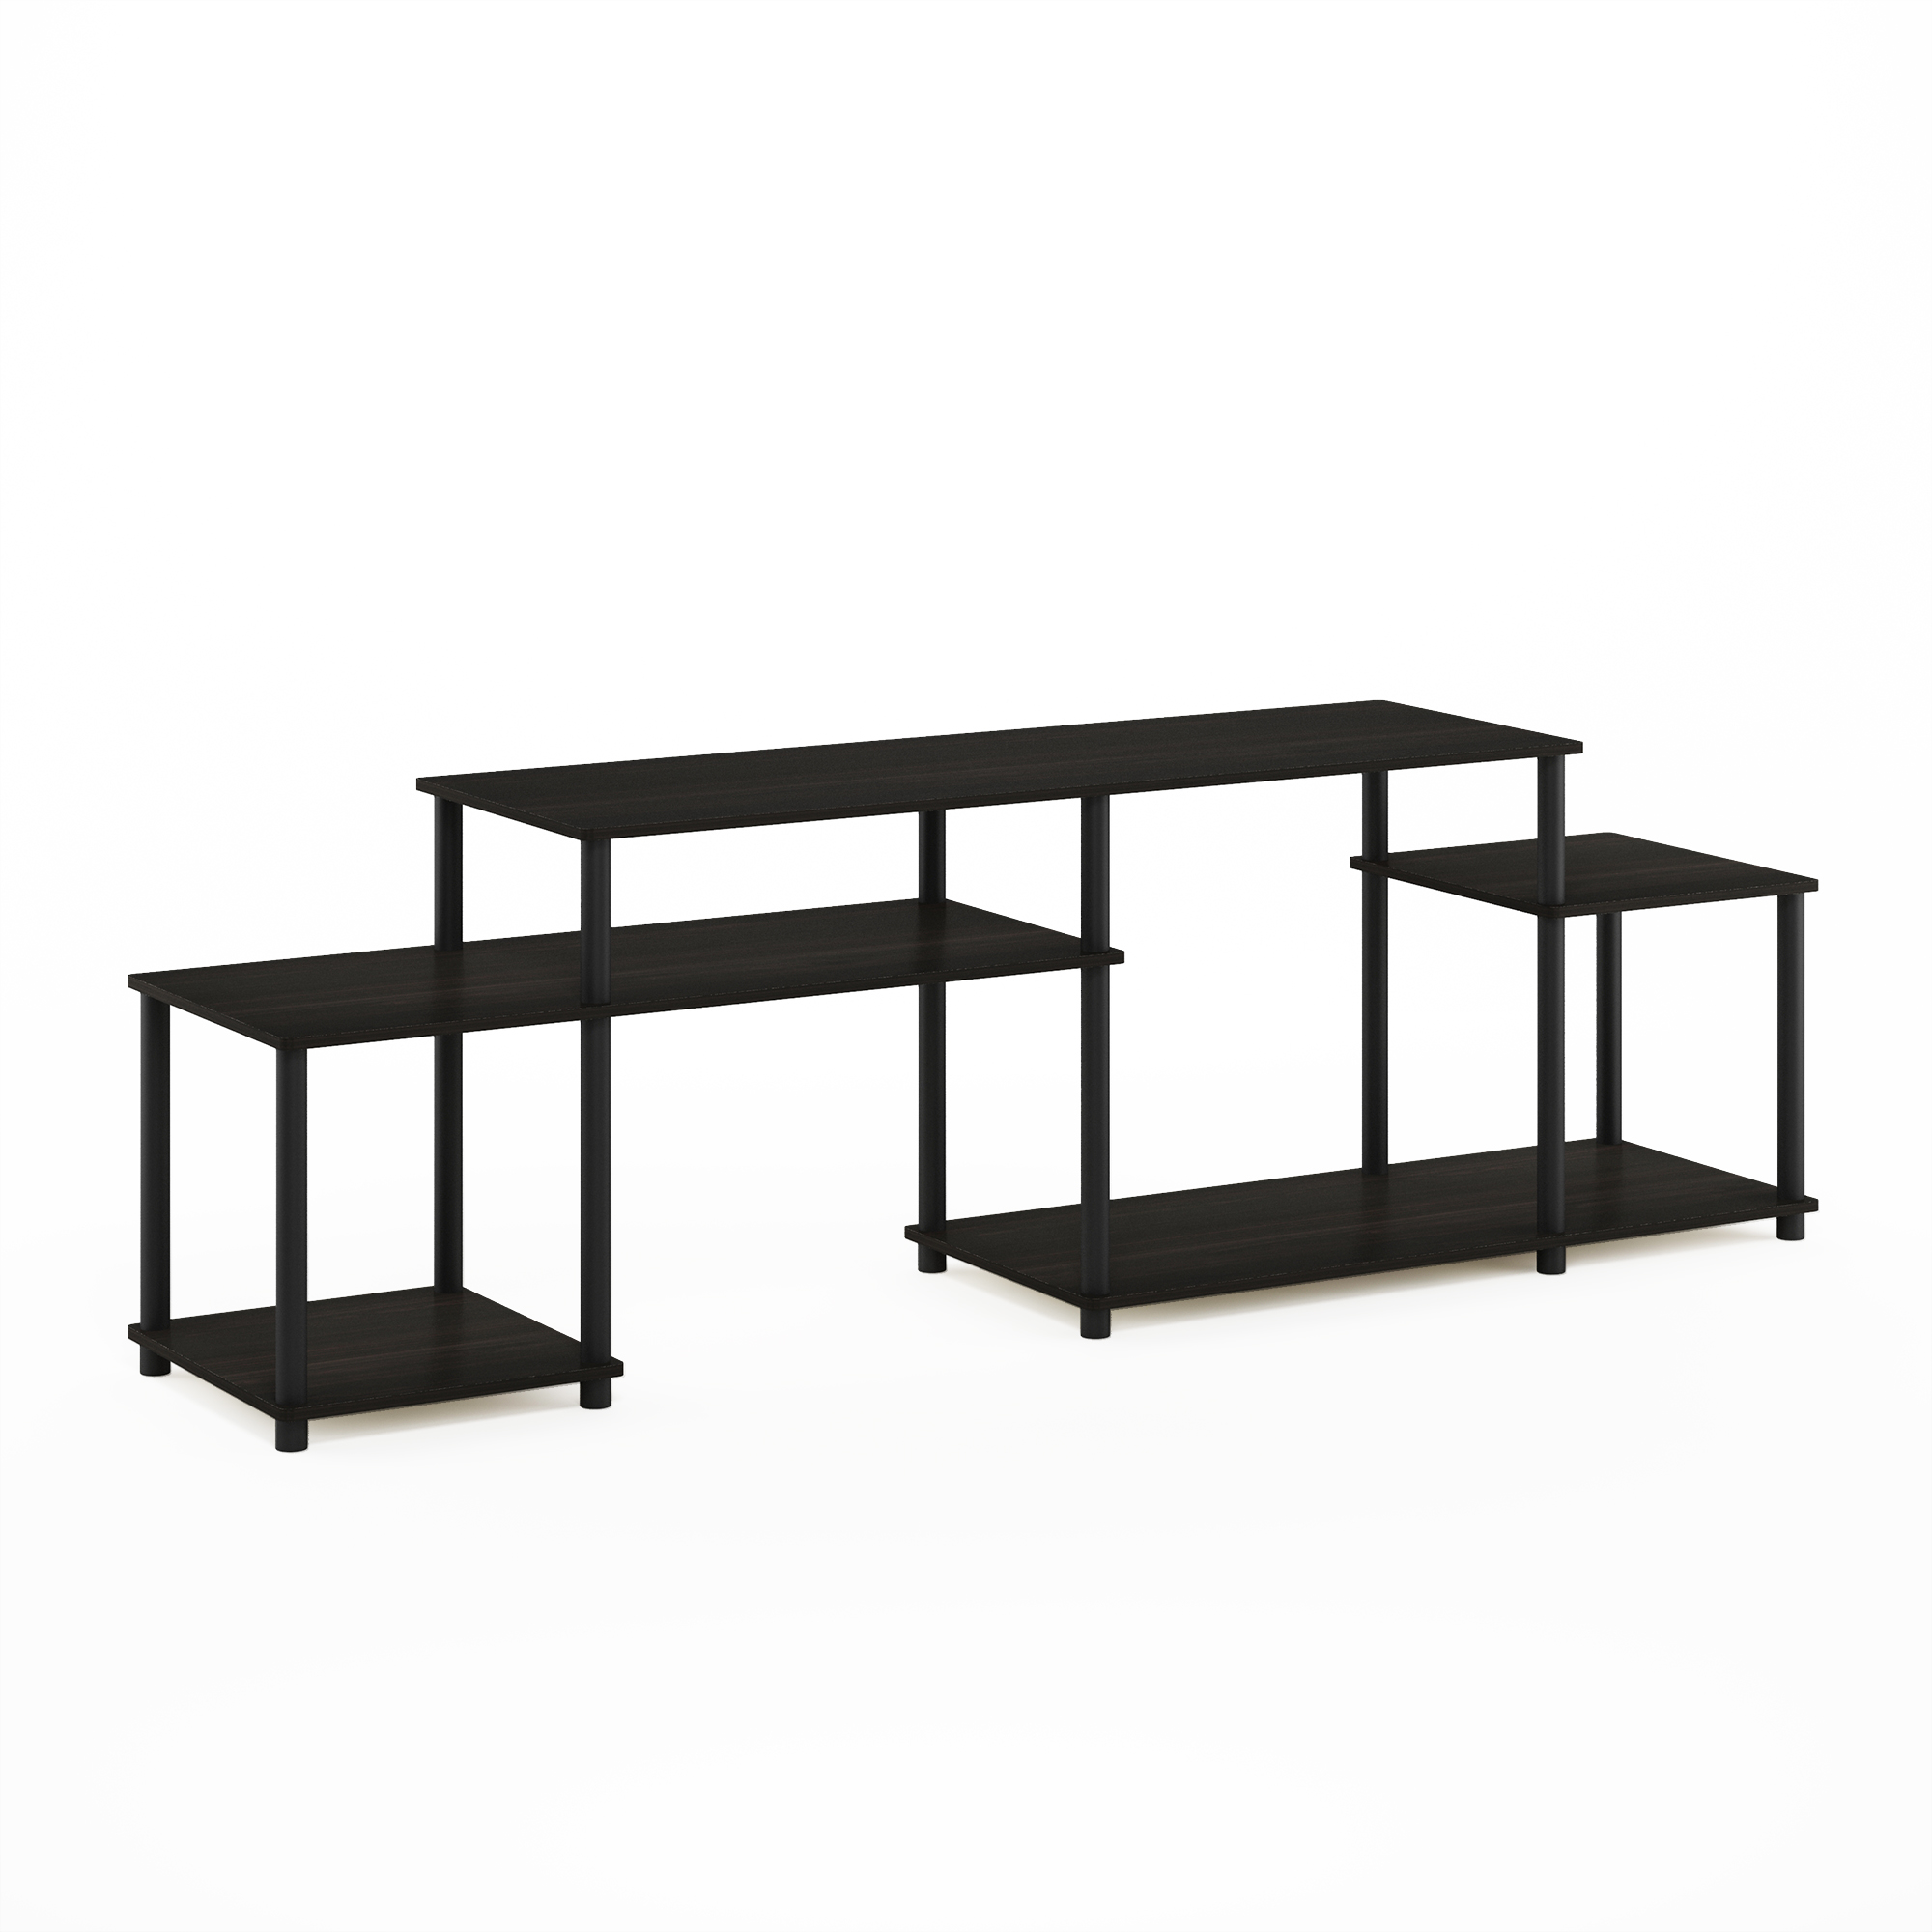 Furinno Turn-N-Tube Handel TV Stand for TV up to 55 Inch, Espresso/Black - image 1 of 3